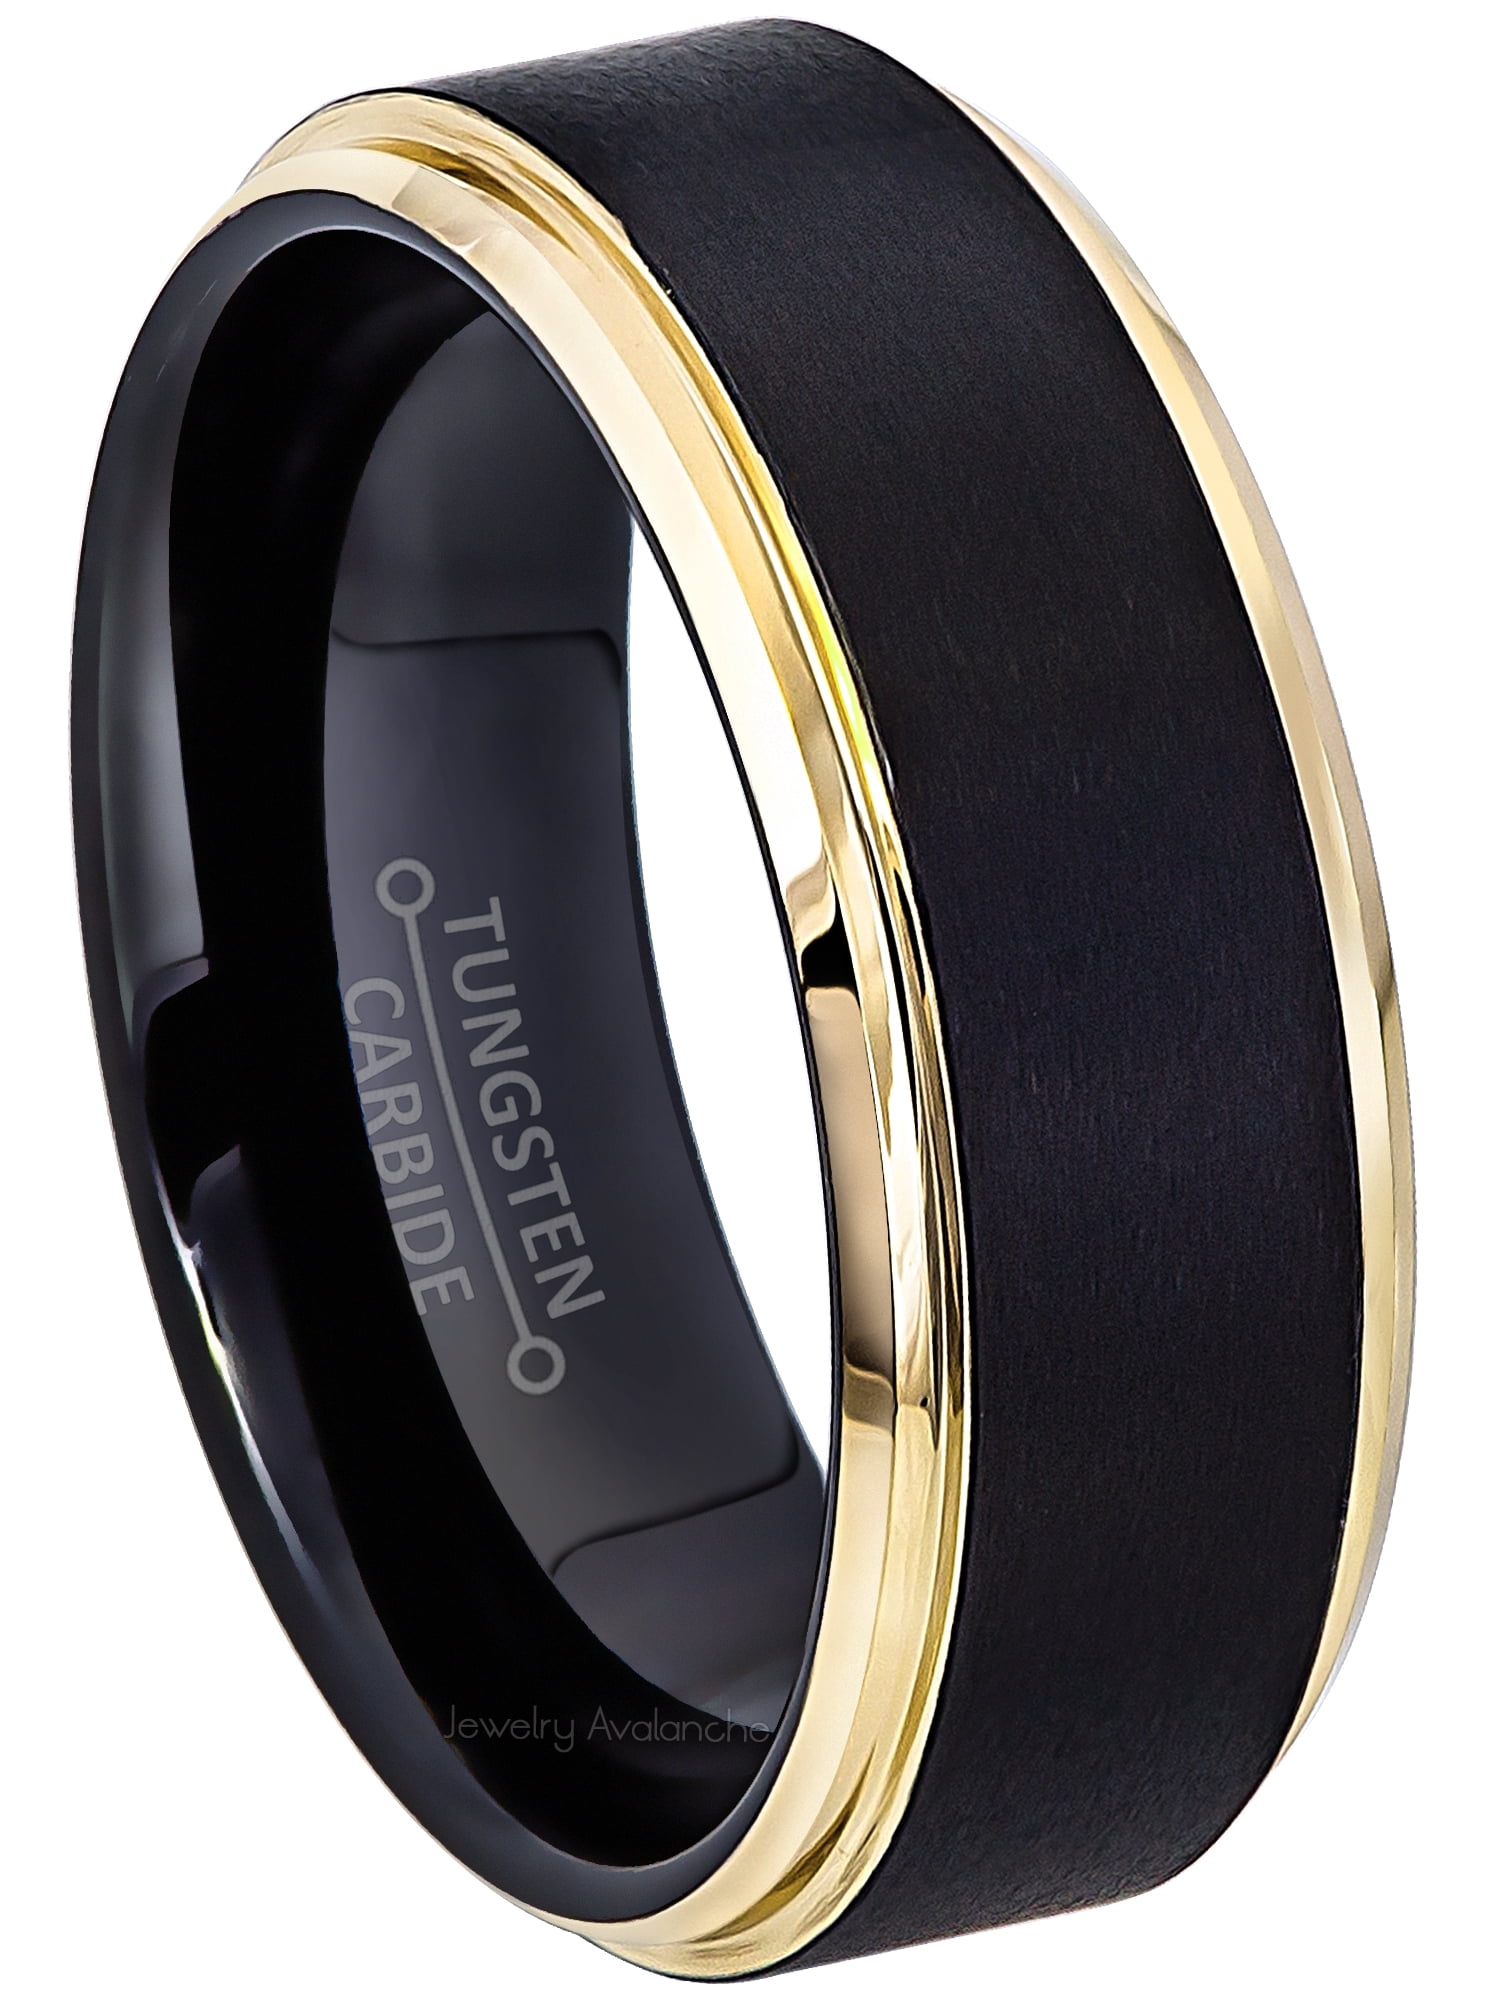 Tungsten Ring Mens Wedding Band Brushed Stripe Center Bridal Jewelry Size 6-13 